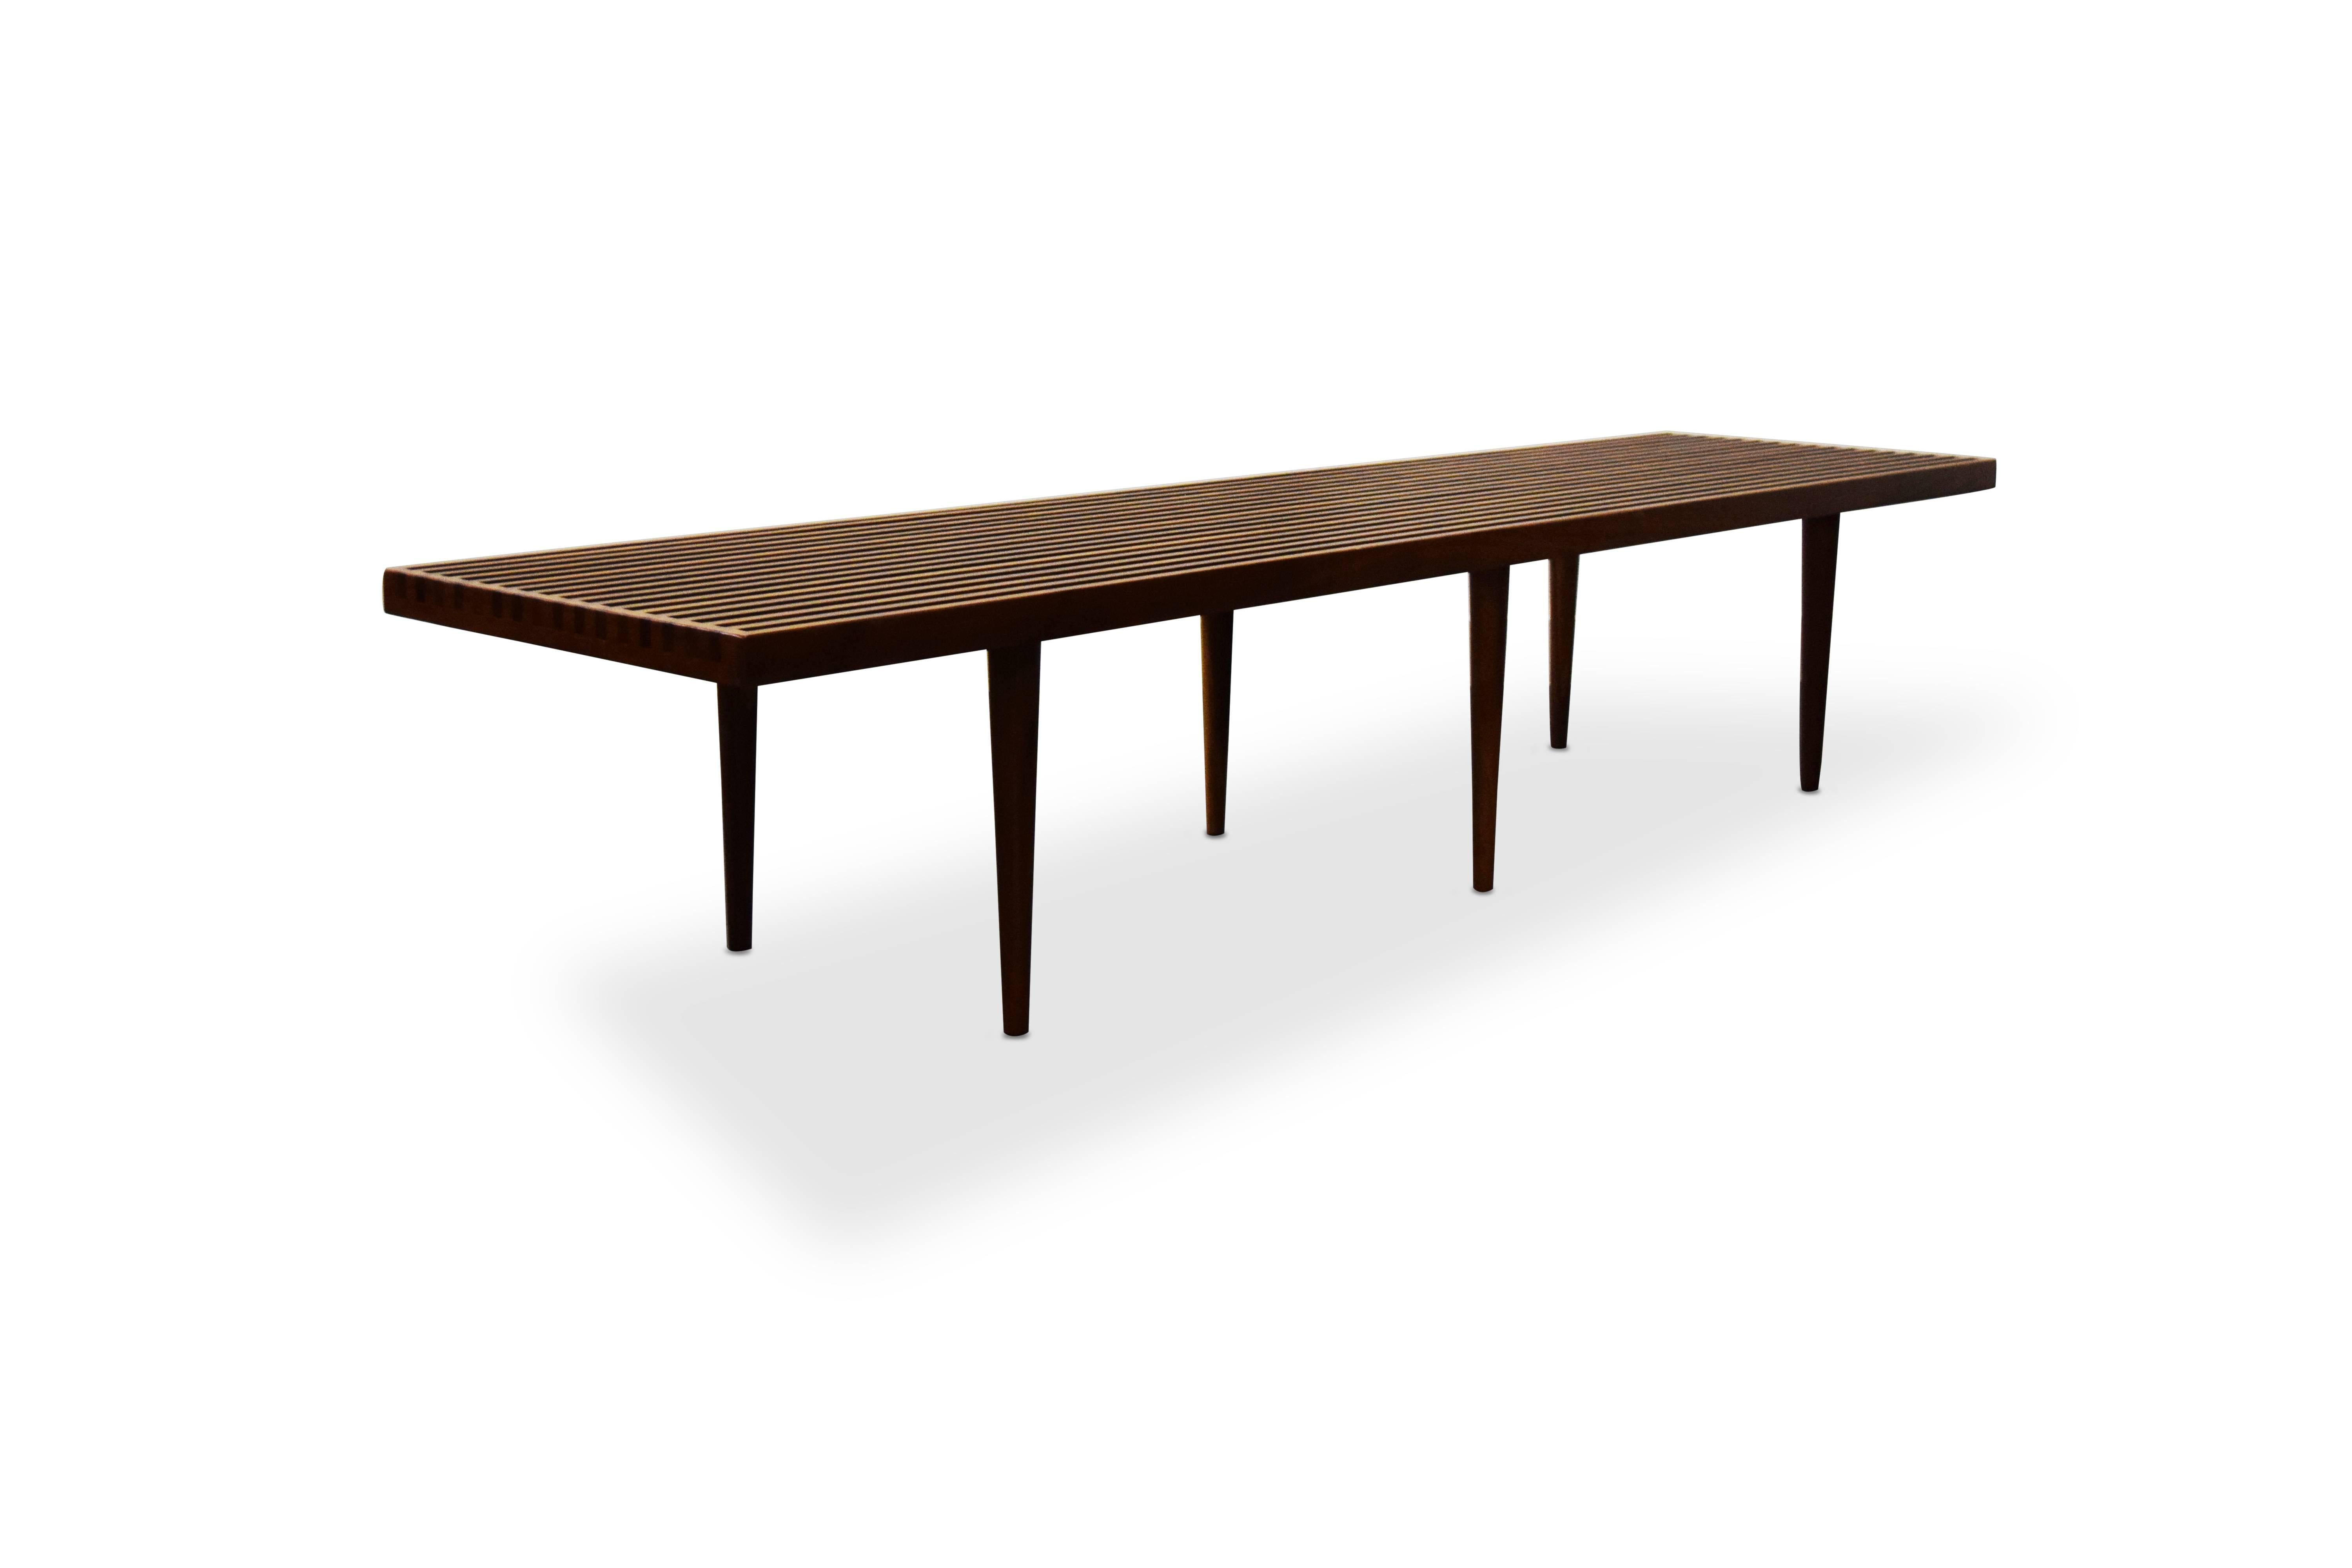 Mel Smilow for Smilow-Thielle slat bench. Bench has been restored. Rare 6' version of this style by Mel Smilow.